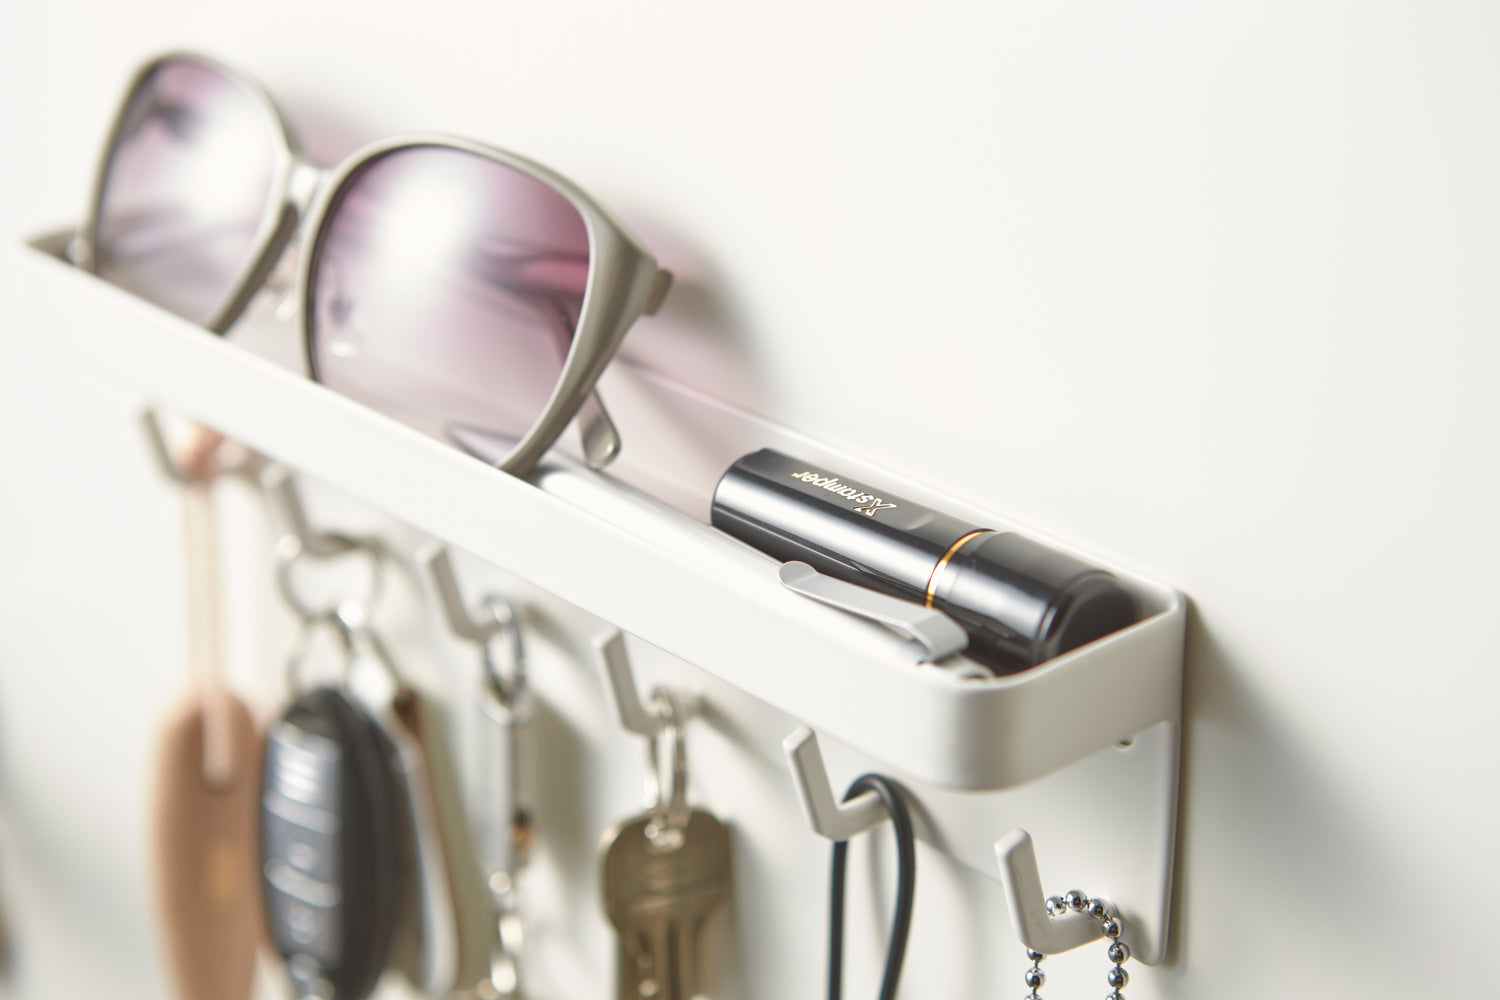 View 6 - Close up view of white Magnetic Key Rack with Tray holding keys and sunglasses by Yamazaki Home.